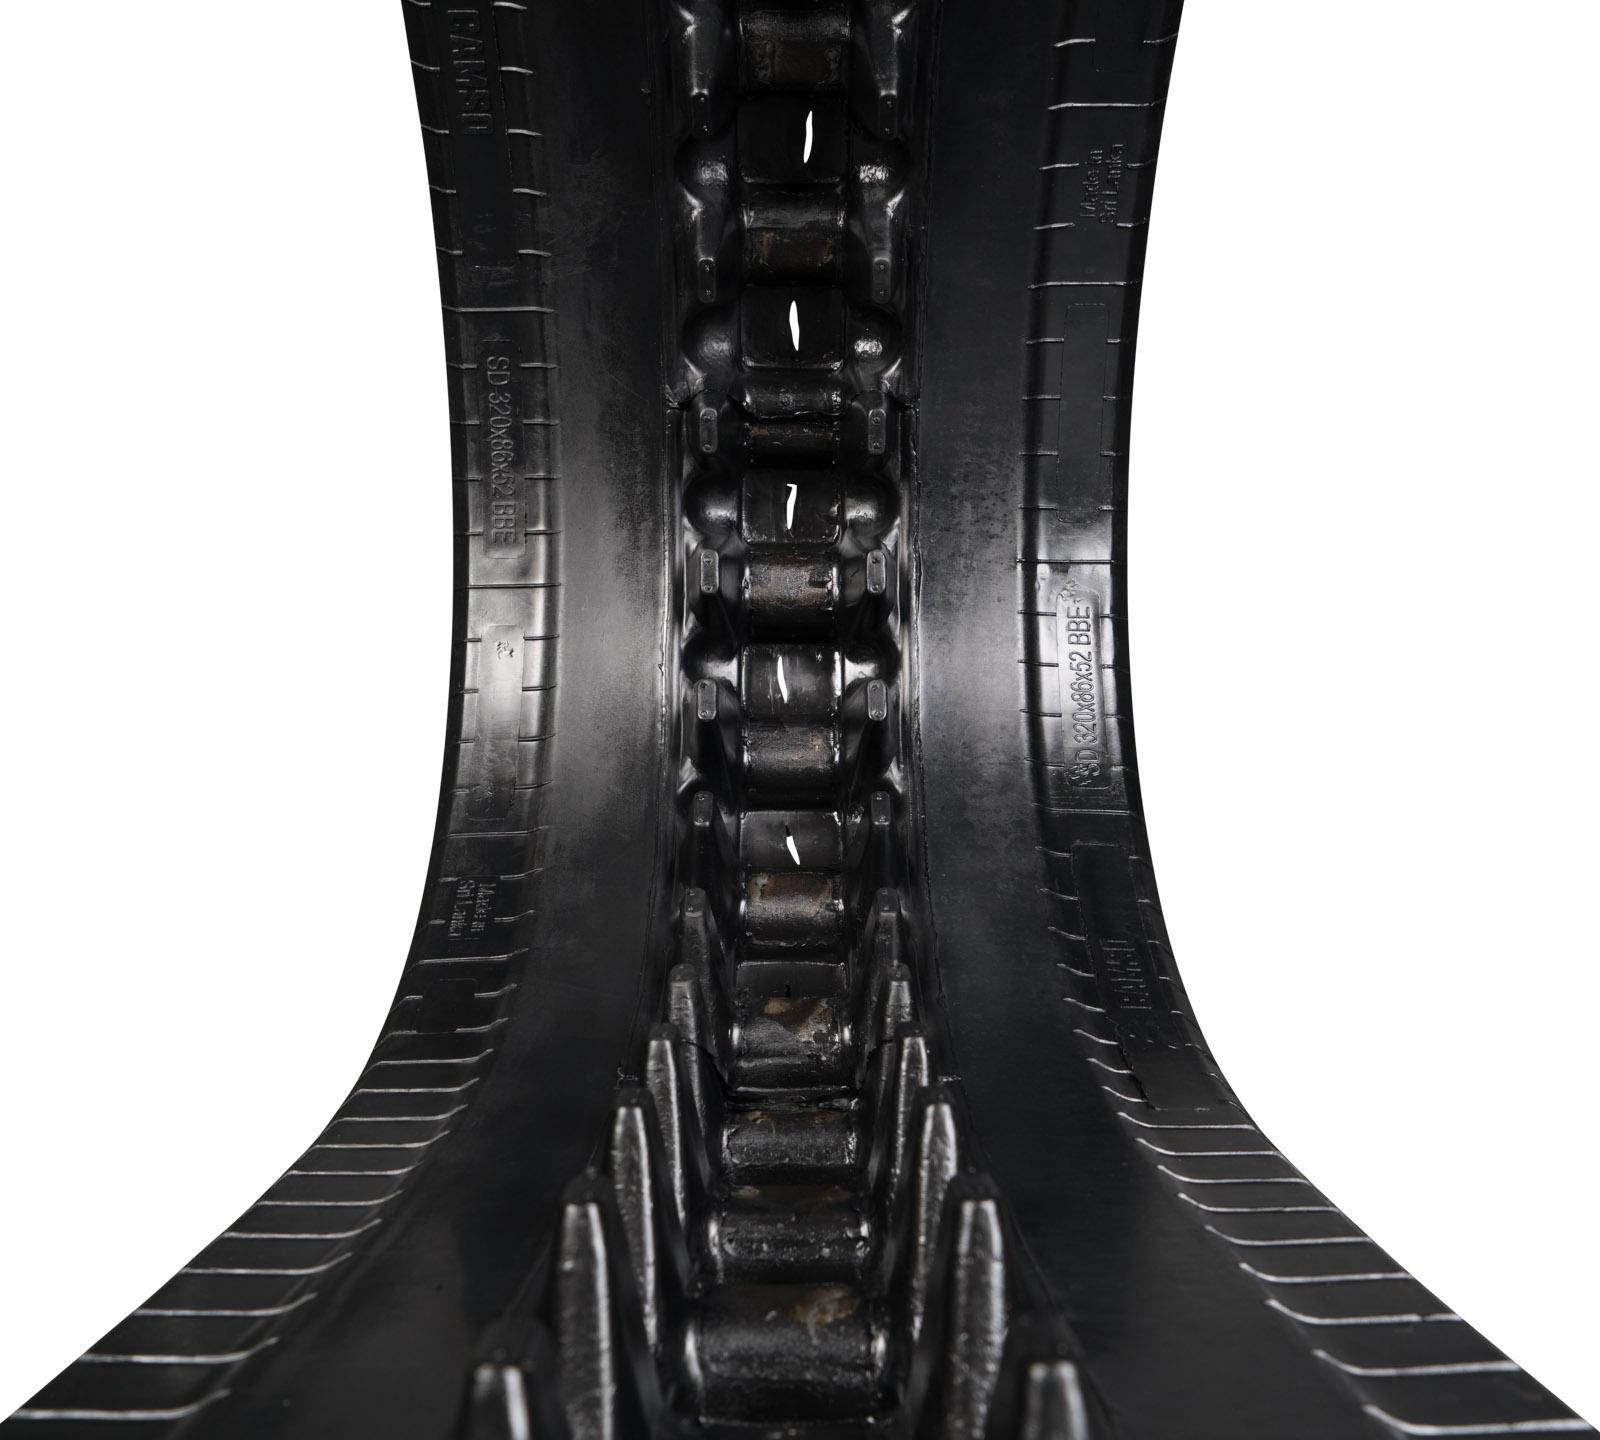 set of 2 13" camso heavy duty sawtooth pattern rubber track (320x86bx53)